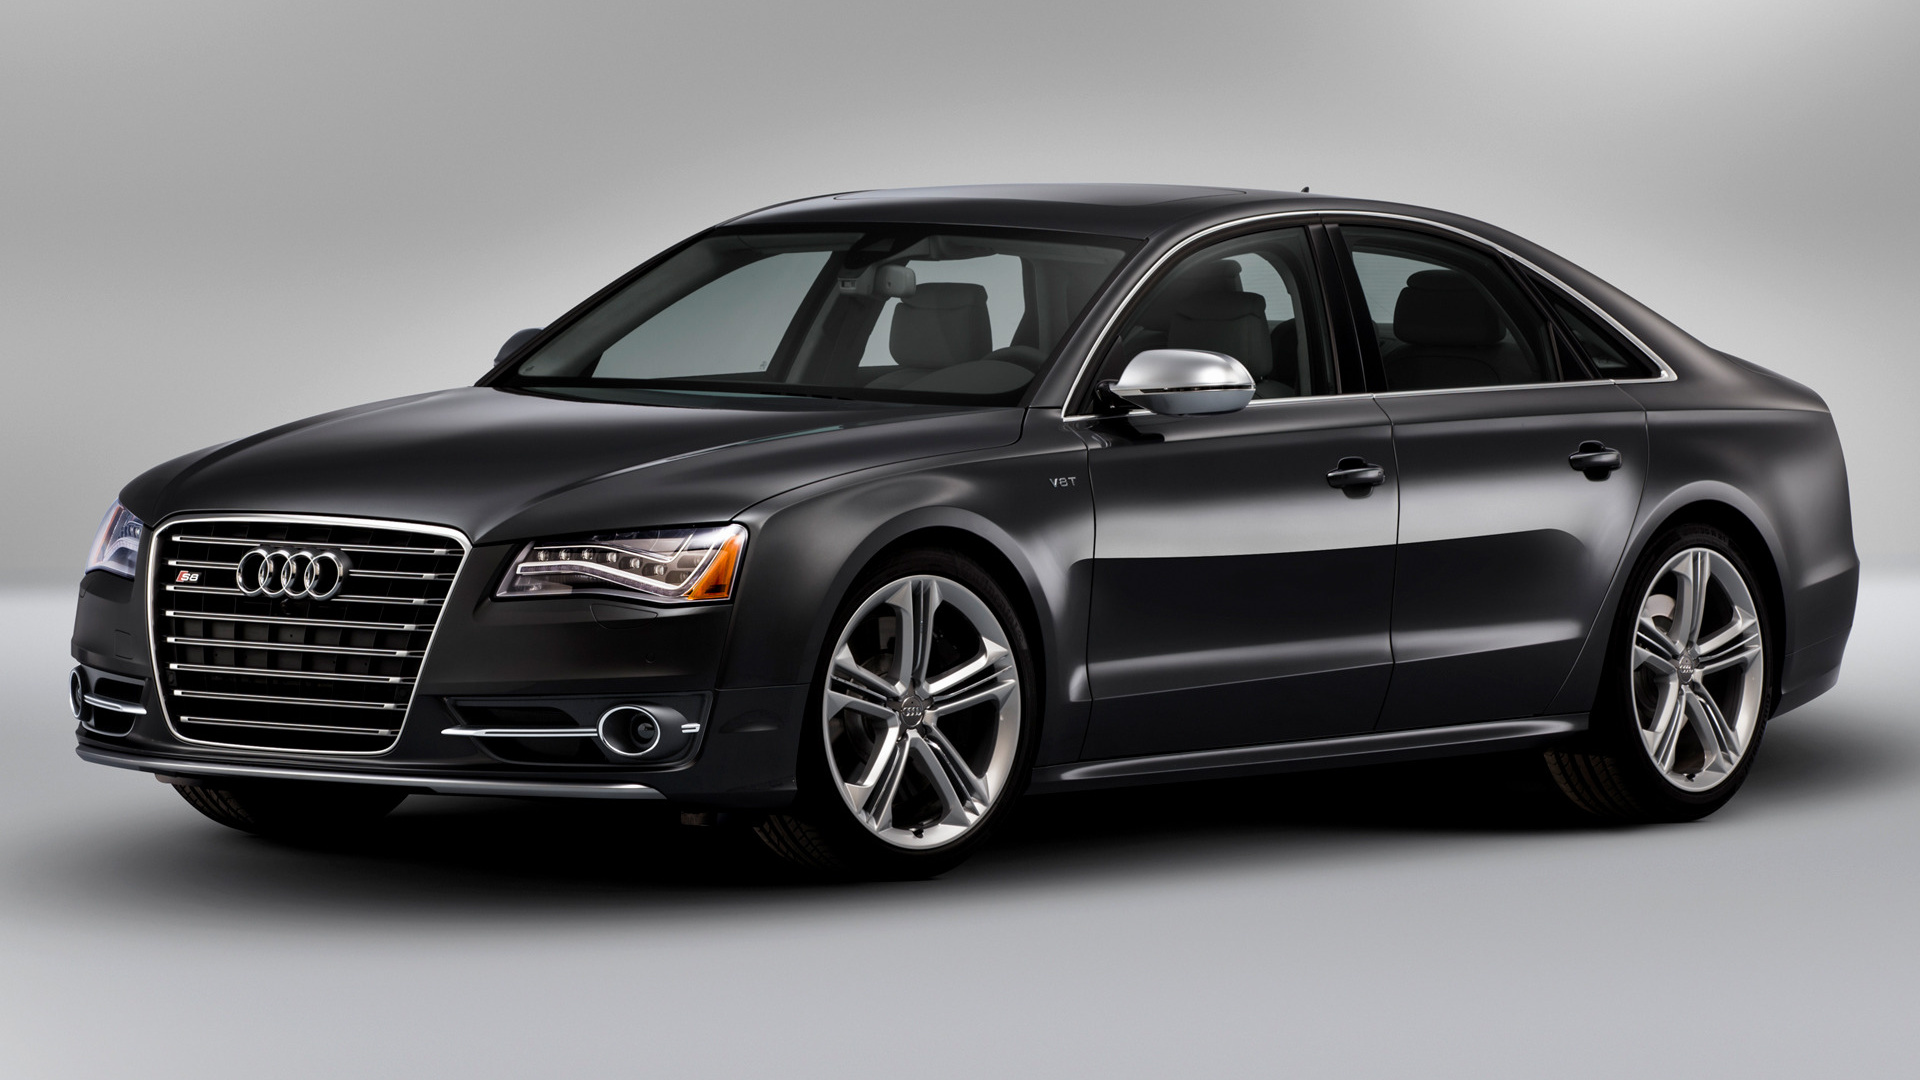 2012 Audi S8 (US) - Wallpapers and HD Images | Car Pixel